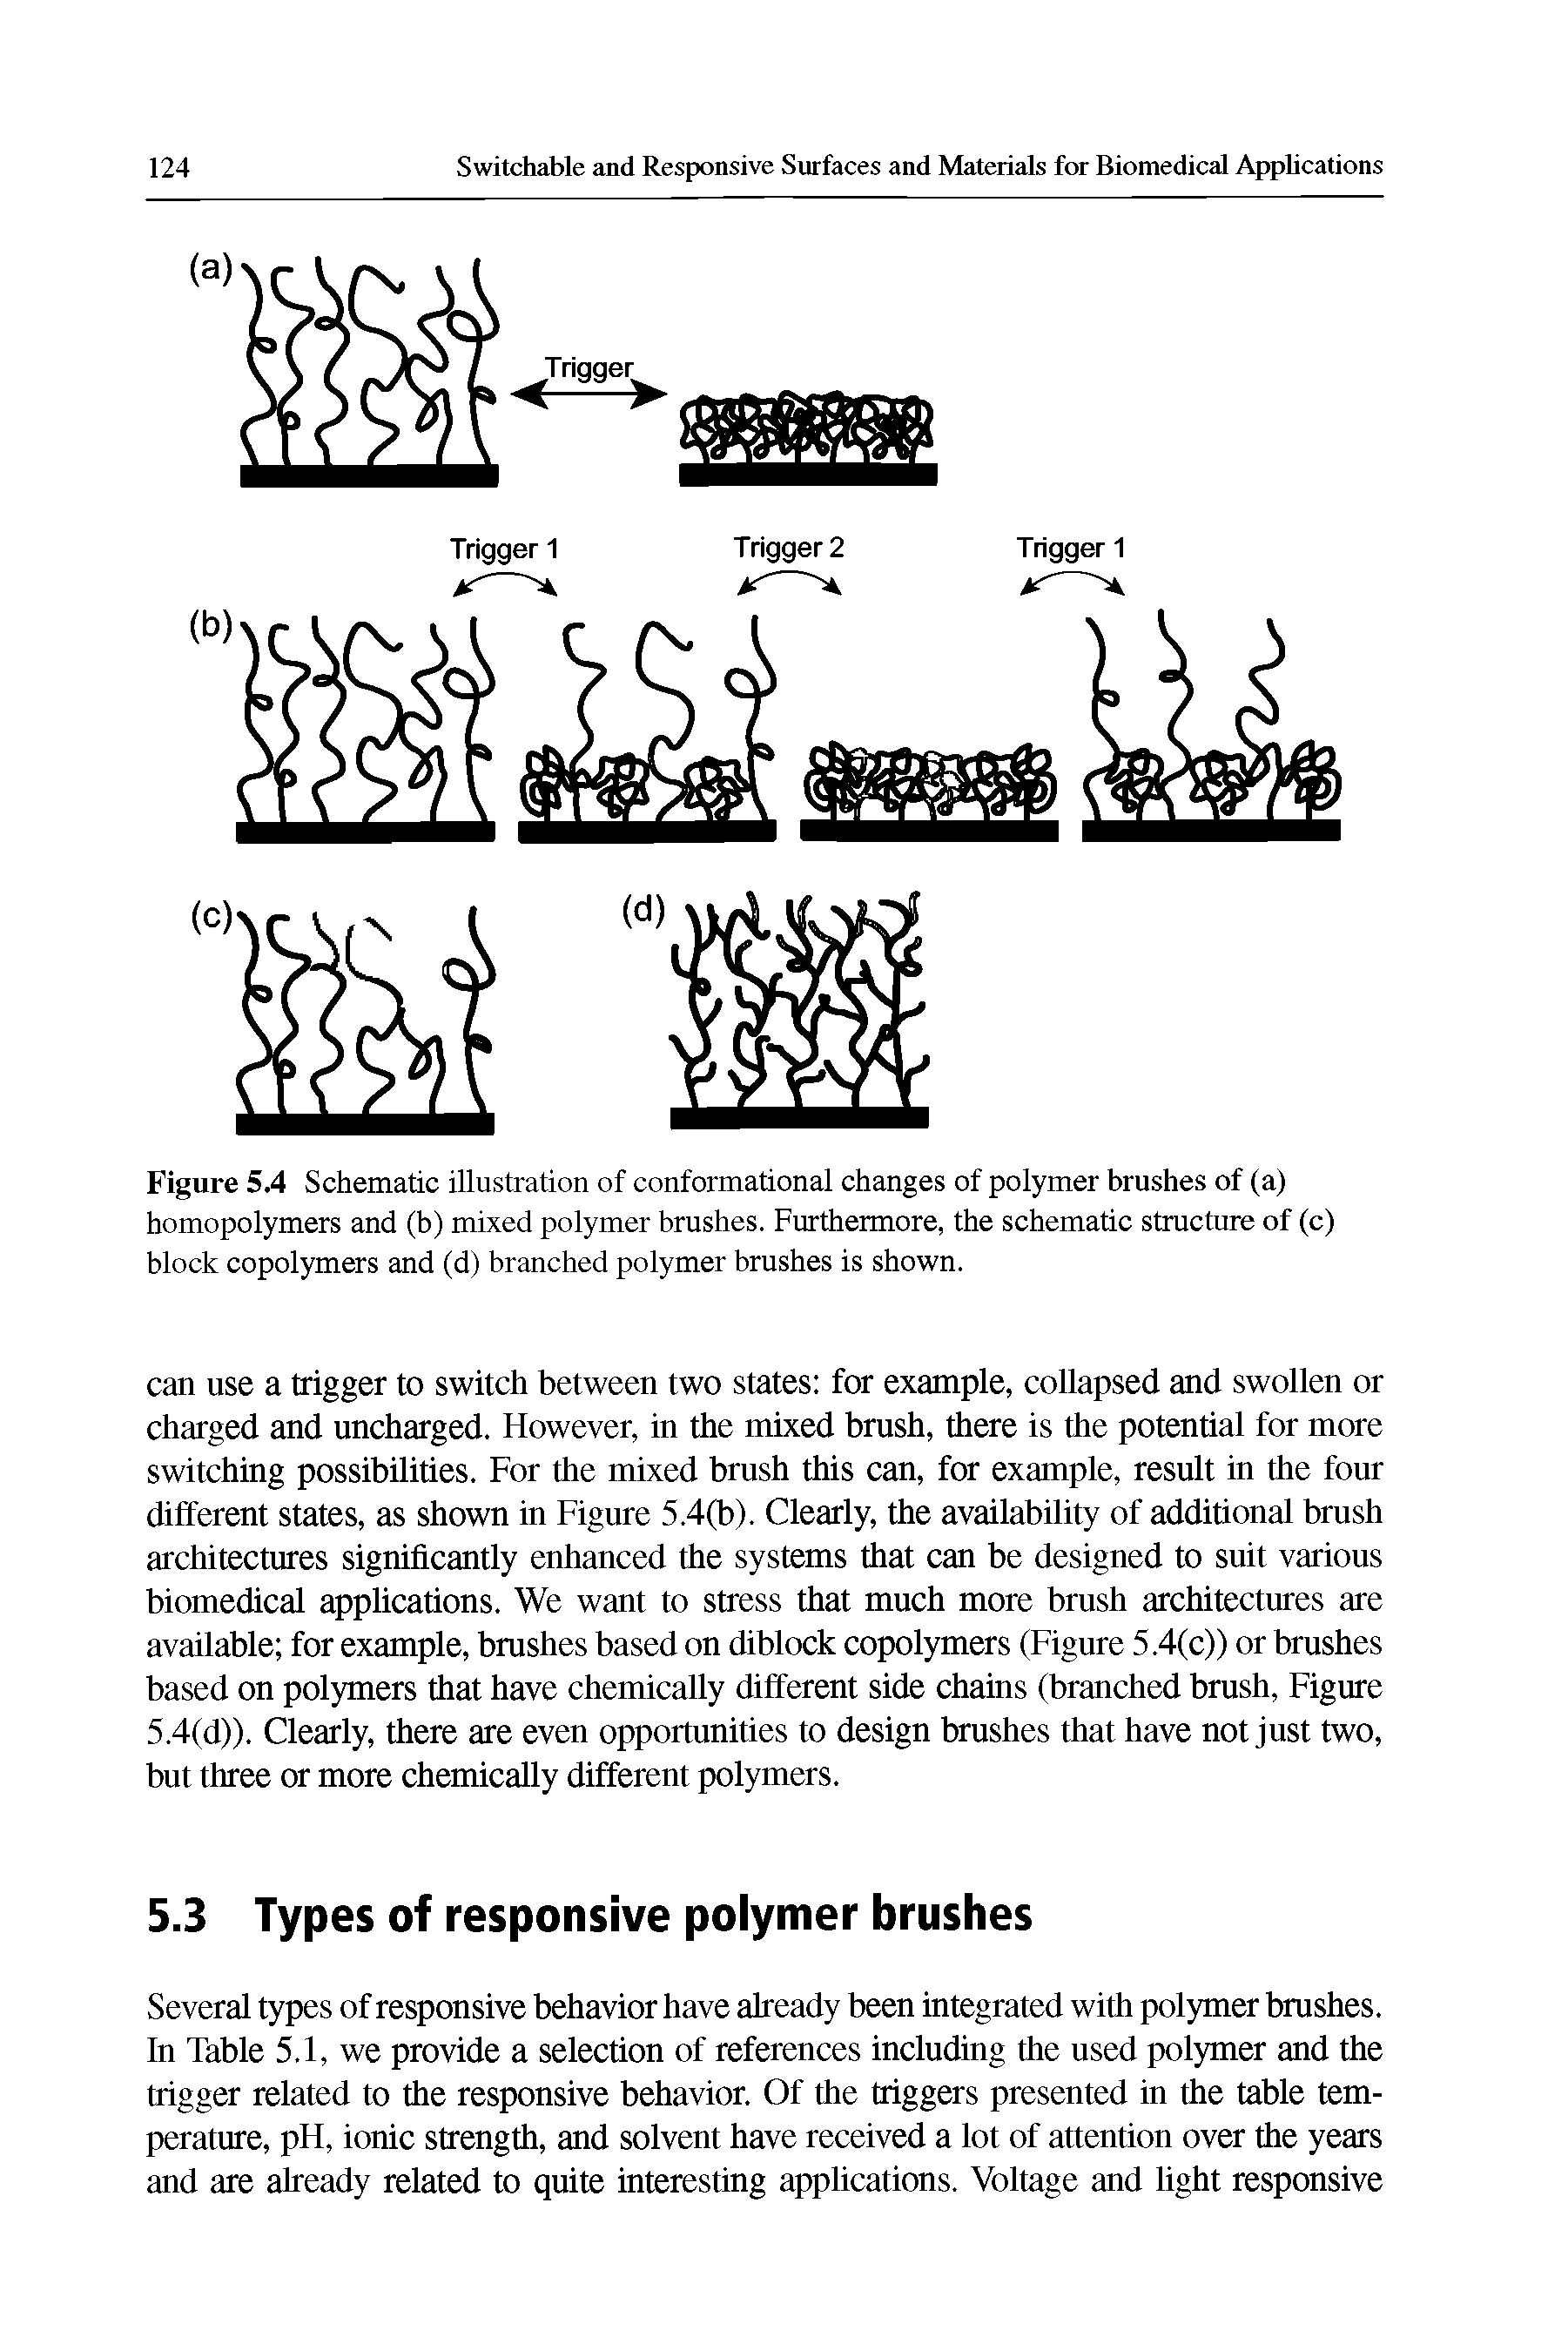 Figure 5.4 Schematic illustration of conformational changes of polymer brushes of (a) homopolymers and (b) mixed polymer brushes. Furthermore, the schematic structure of (c) block copolymers and (d) branched polymer brushes is shown.